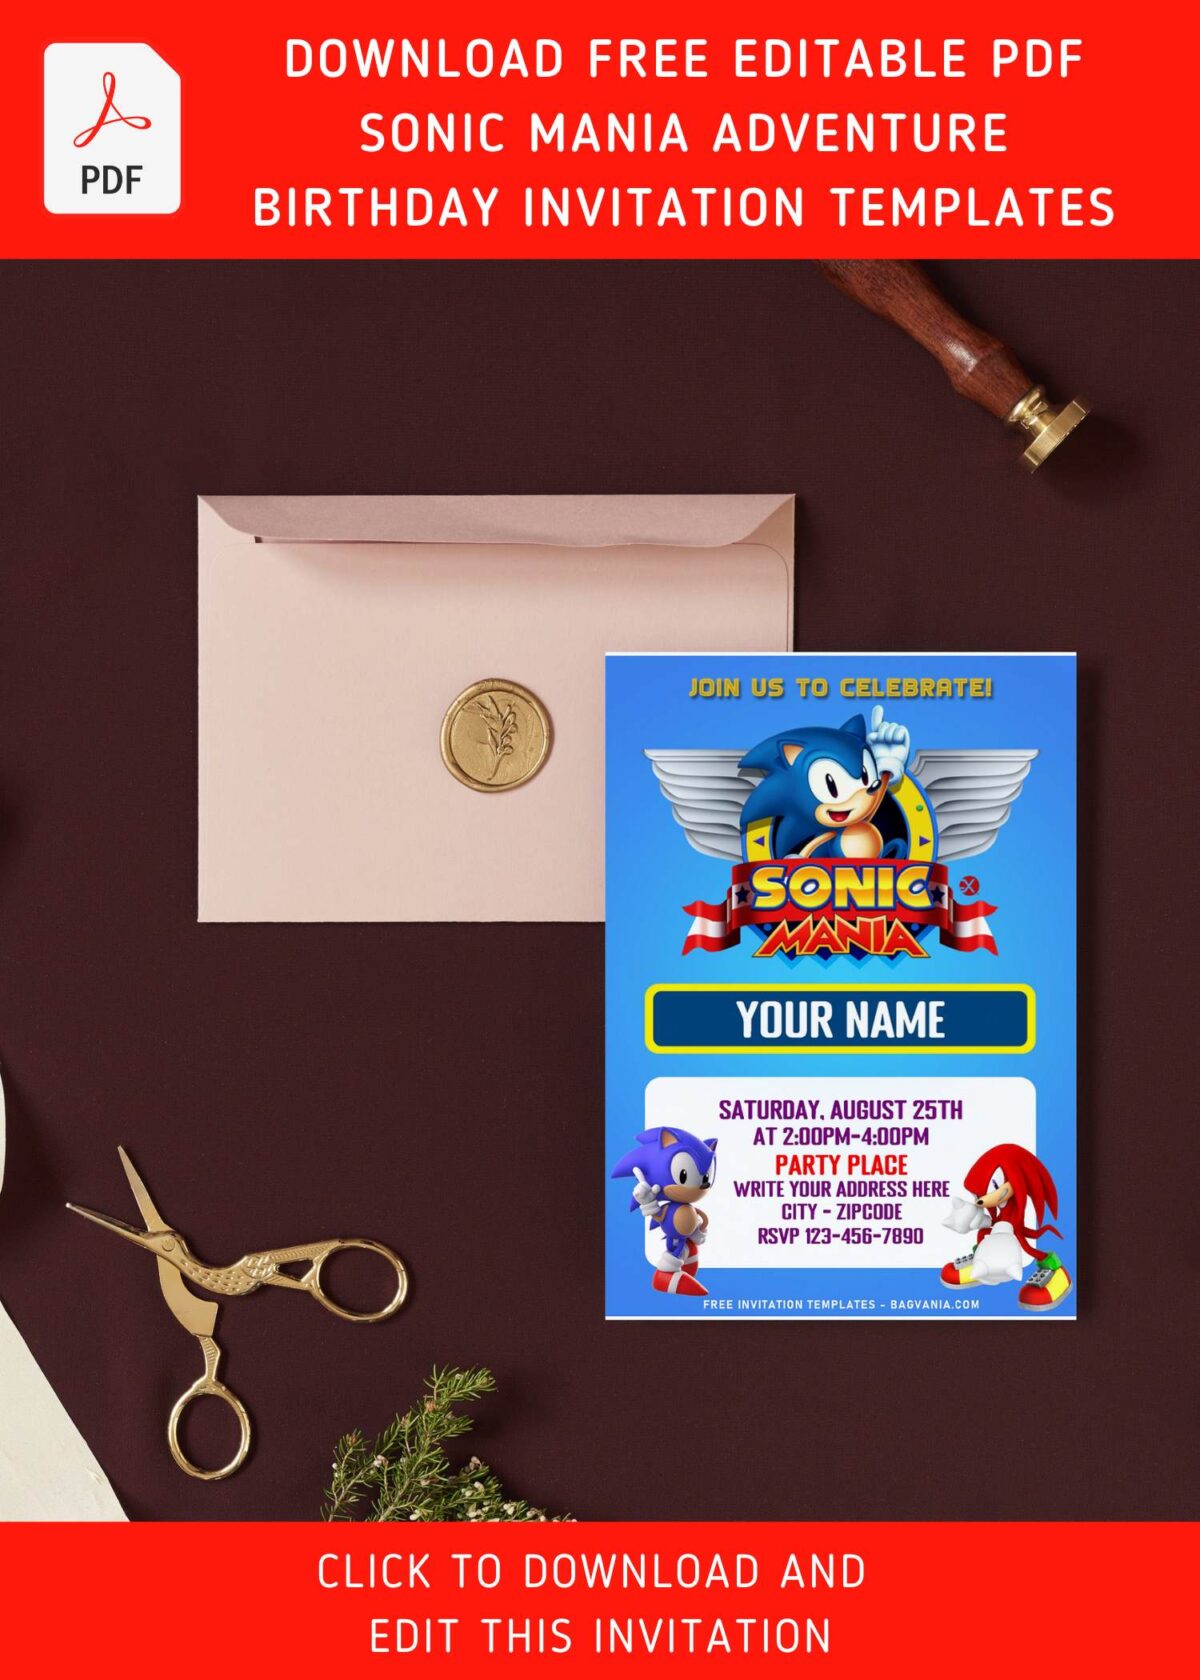 (Free Editable PDF) Super Cool Classic Sonic The Hedgehog Birthday Invitation Templates with cute Sonic and Knuckle the red hedgehog